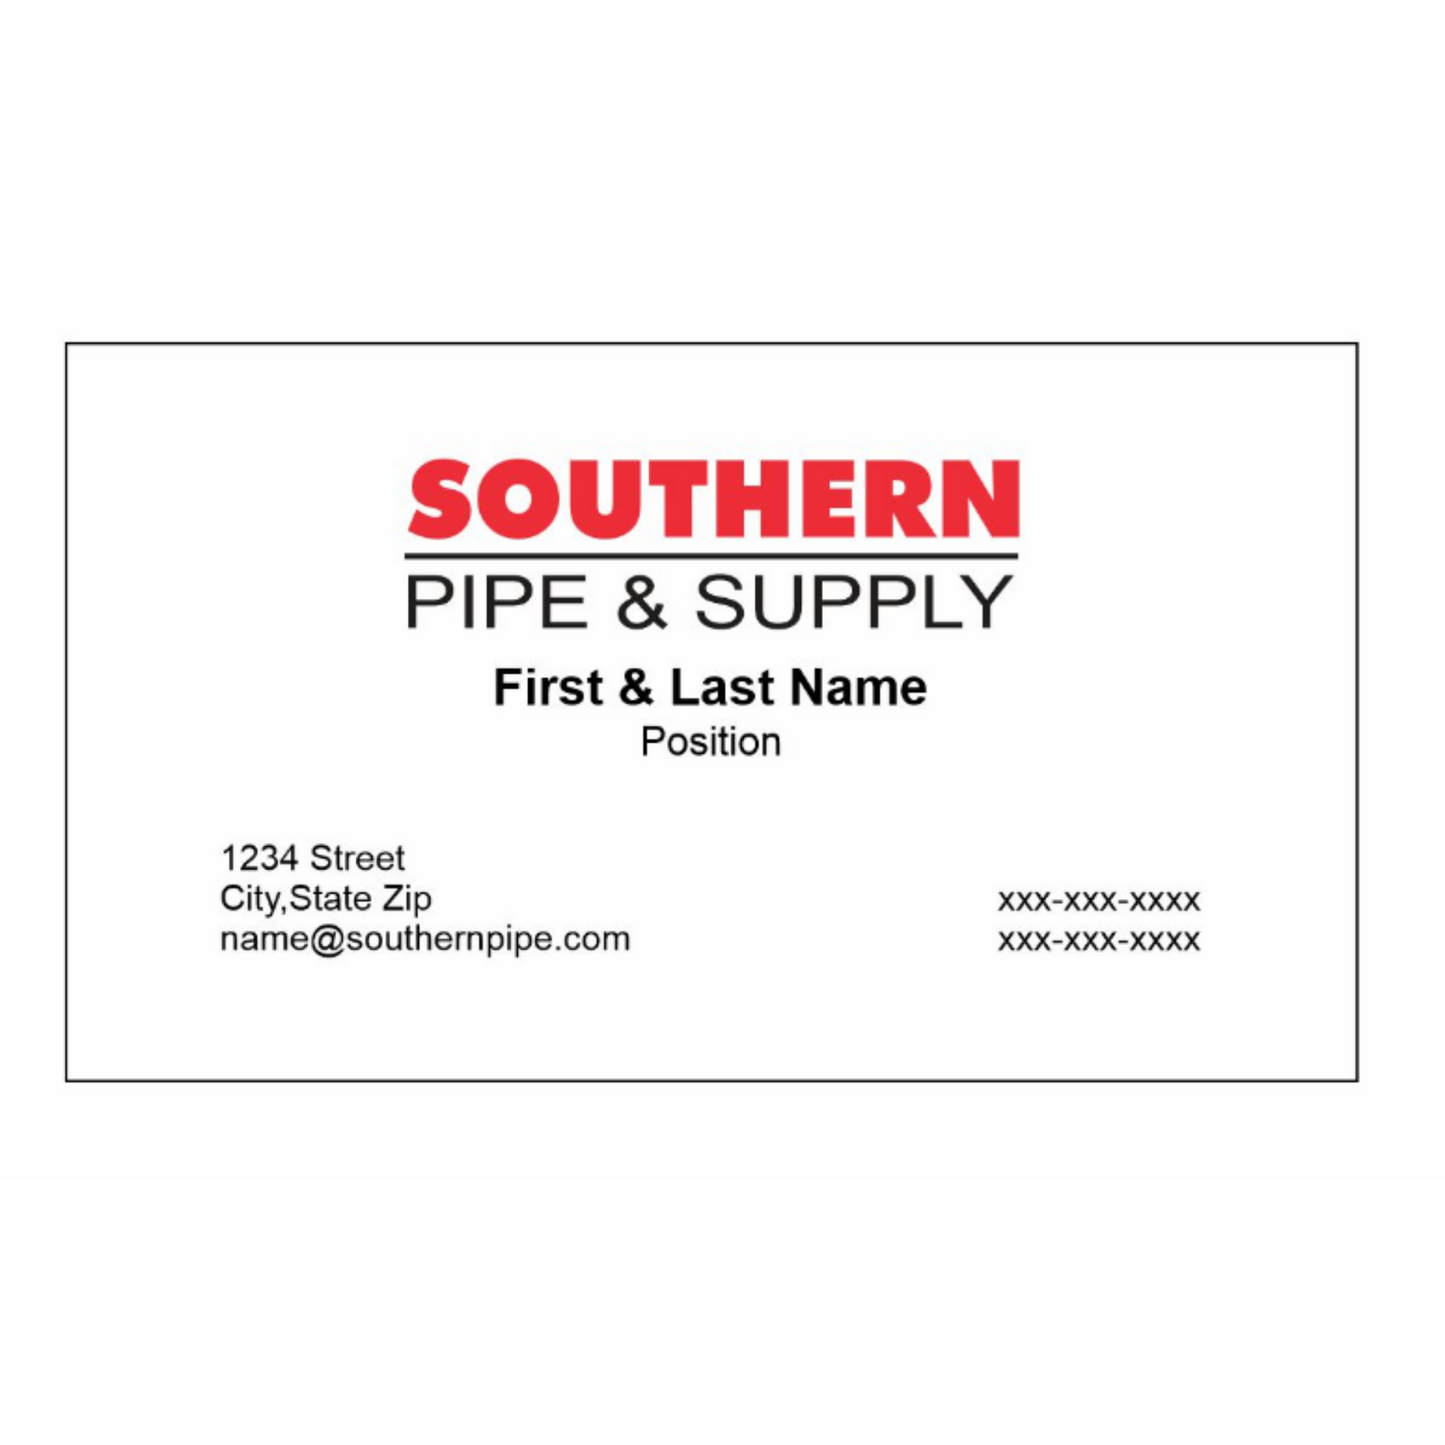 CUSTOM 3.5"W x 2"H Business Cards (250 pack)